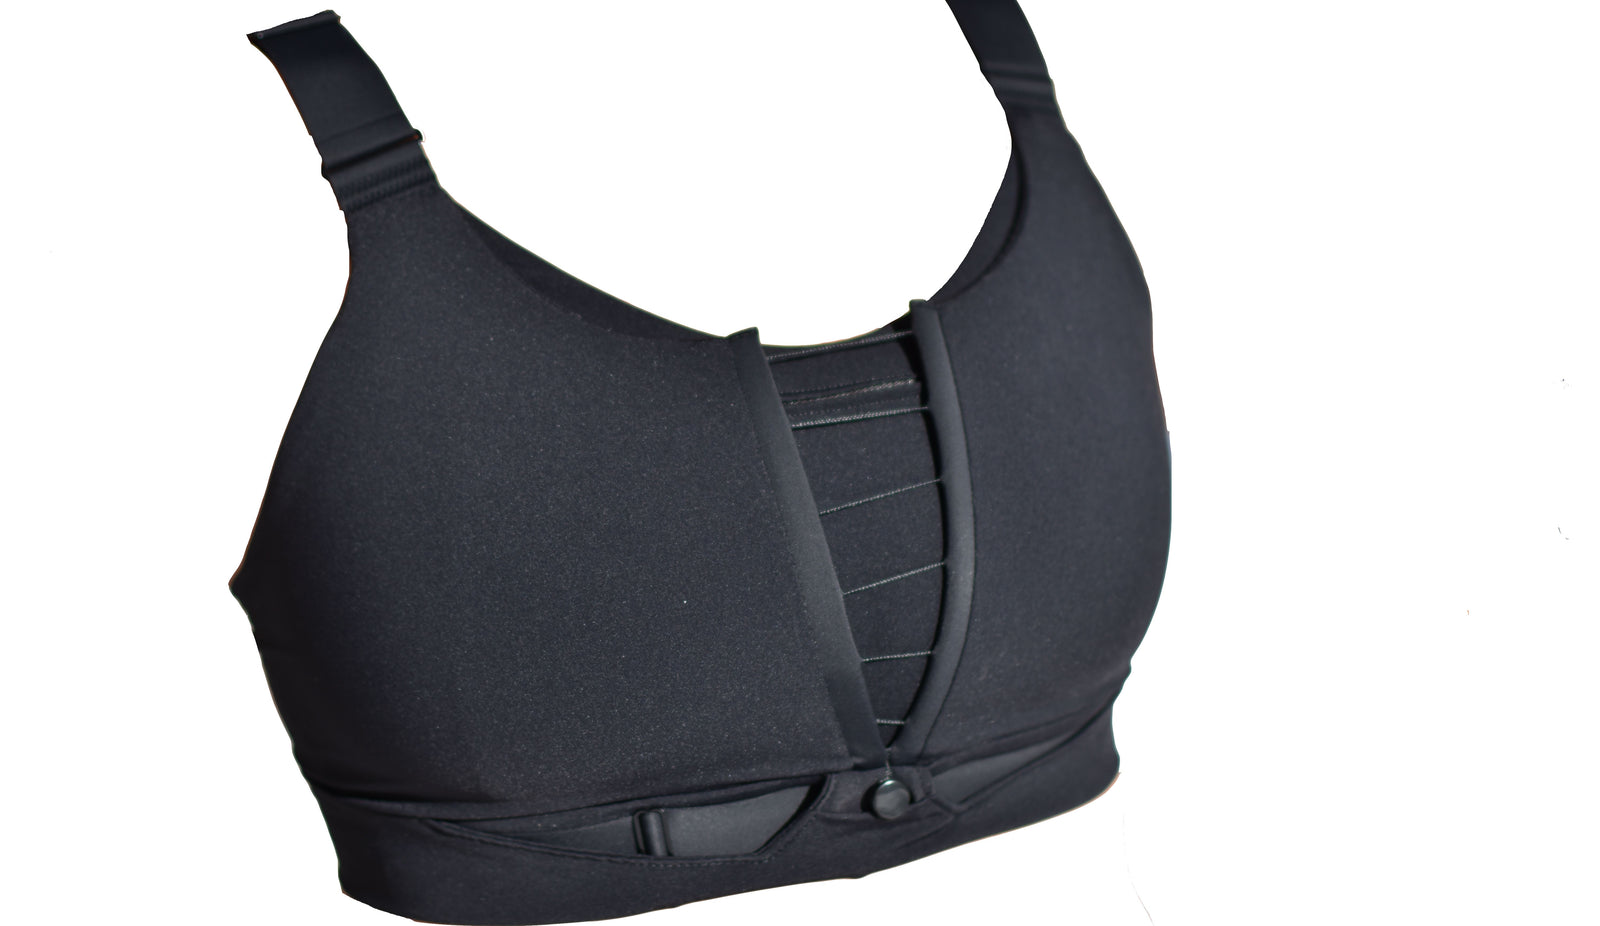 Neuroscience Education Leads To Revolutionary & Patented Sports Bra Technology (Part 6 of 7)